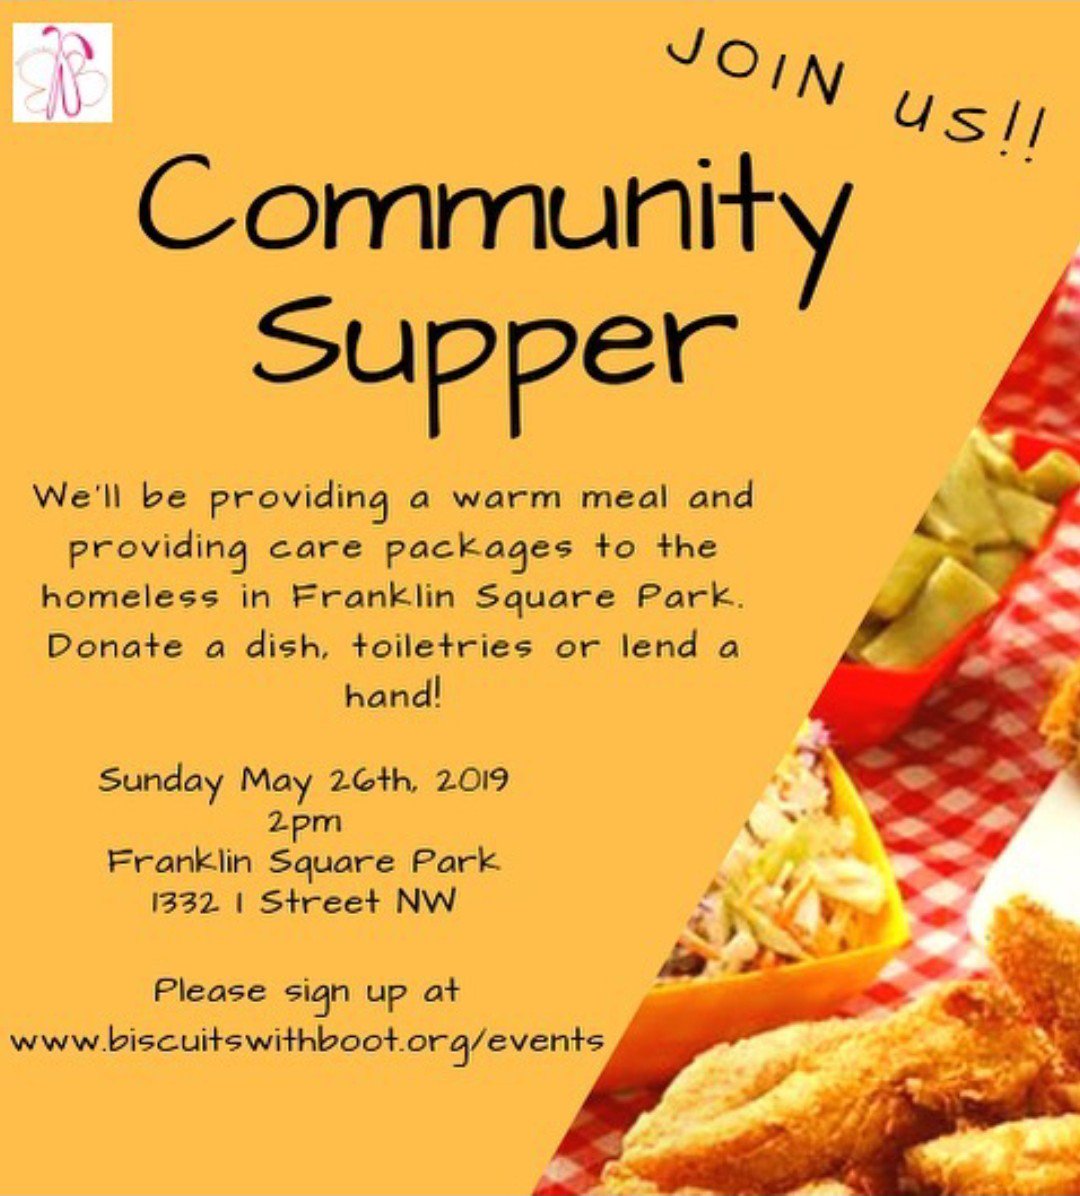 Support @BiscuitsWBoots & @chicdivageek at their #CommunitySupper in the park on Sunday, May 26, 2019, 2 p.m. Freely give of your time, toiletries and, or, a delicious dish for the homeless. See flyer 👇🏼 #CommunityDay #WashingtonDC #homelessness #chefs #restaurants #giveback